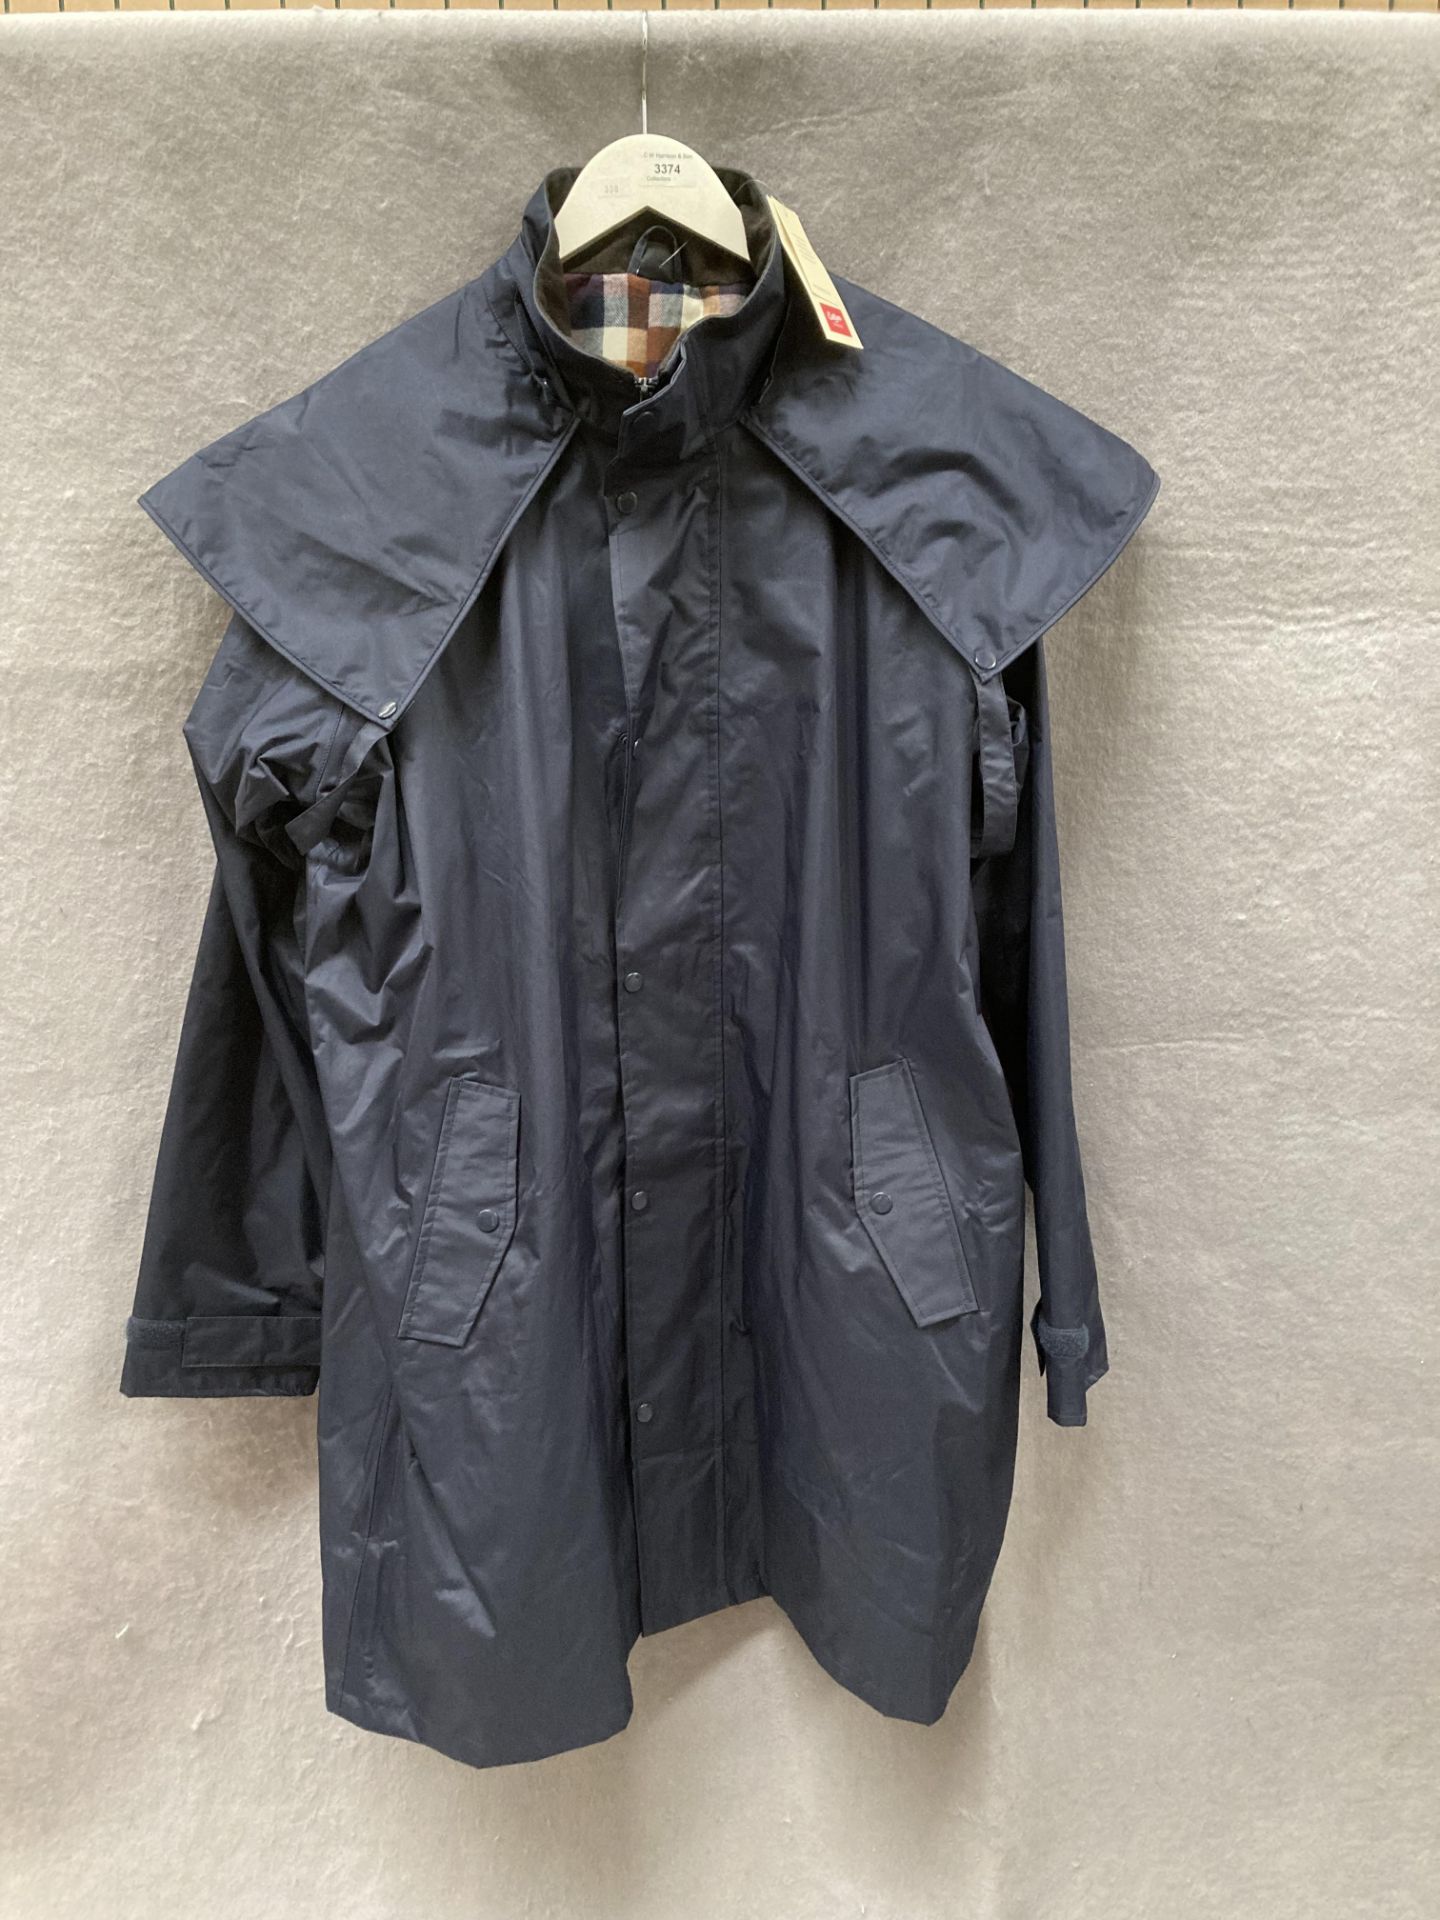 A Cotton Traders Windermere waterproof coat, size 2XL,